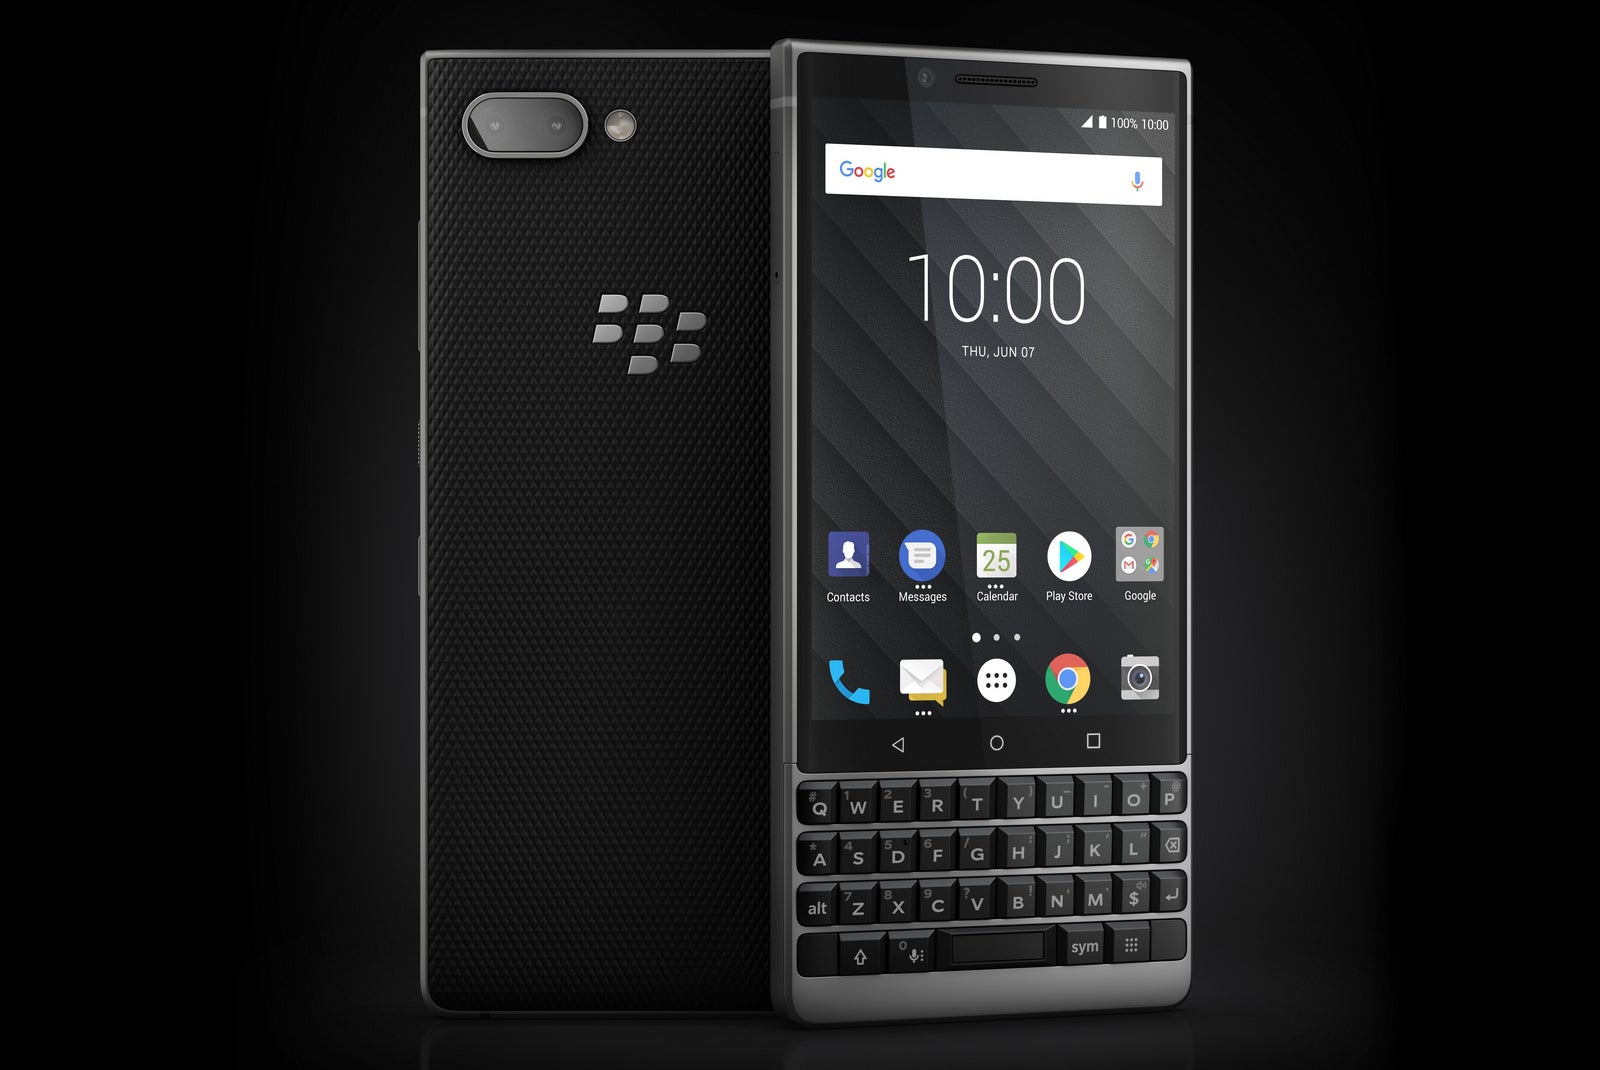 The BlackBerry KEY2 has been announced: improved keyboard, Optical Superzoom, 2-day battery life